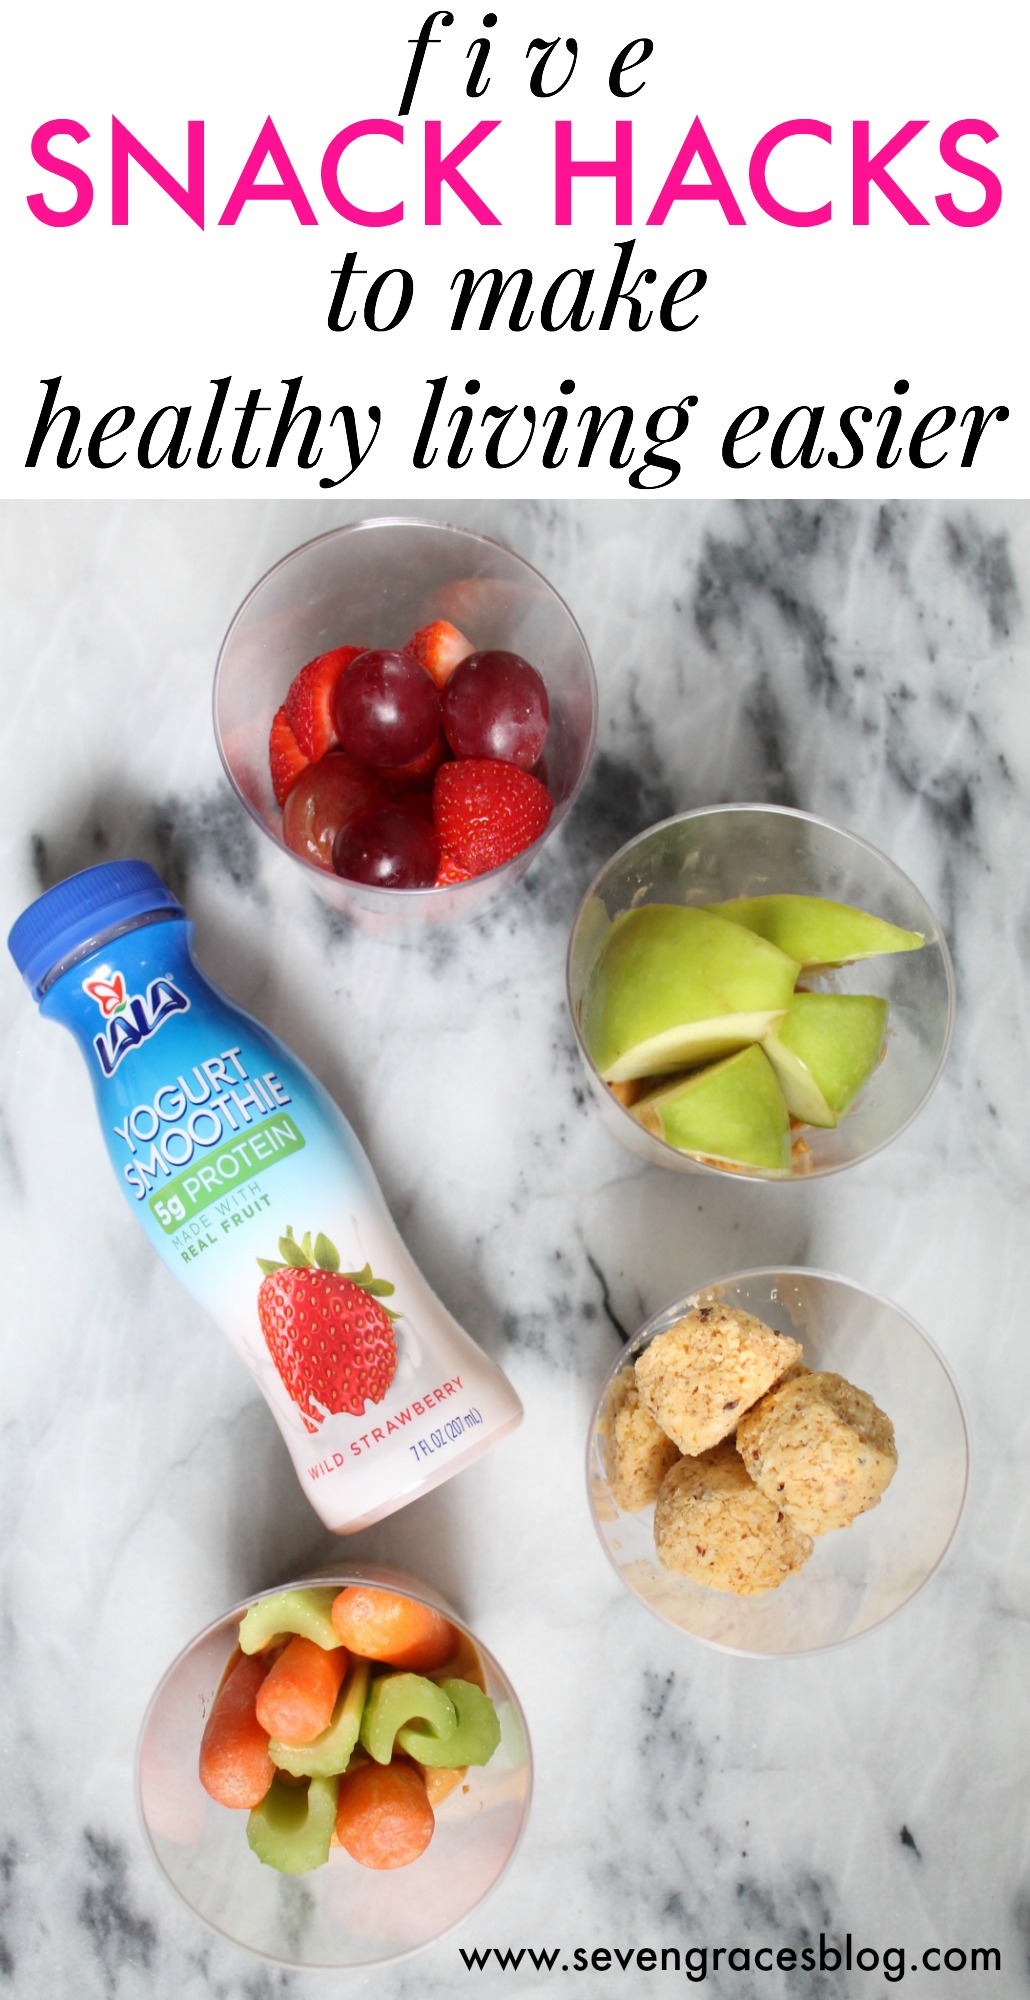 5 snack hacks to make healthy living easier: How to make Lala Yogurt Smoothies, fresh fruits, veggies, and more part of your smart snacking plan. #lalachallenge #ad